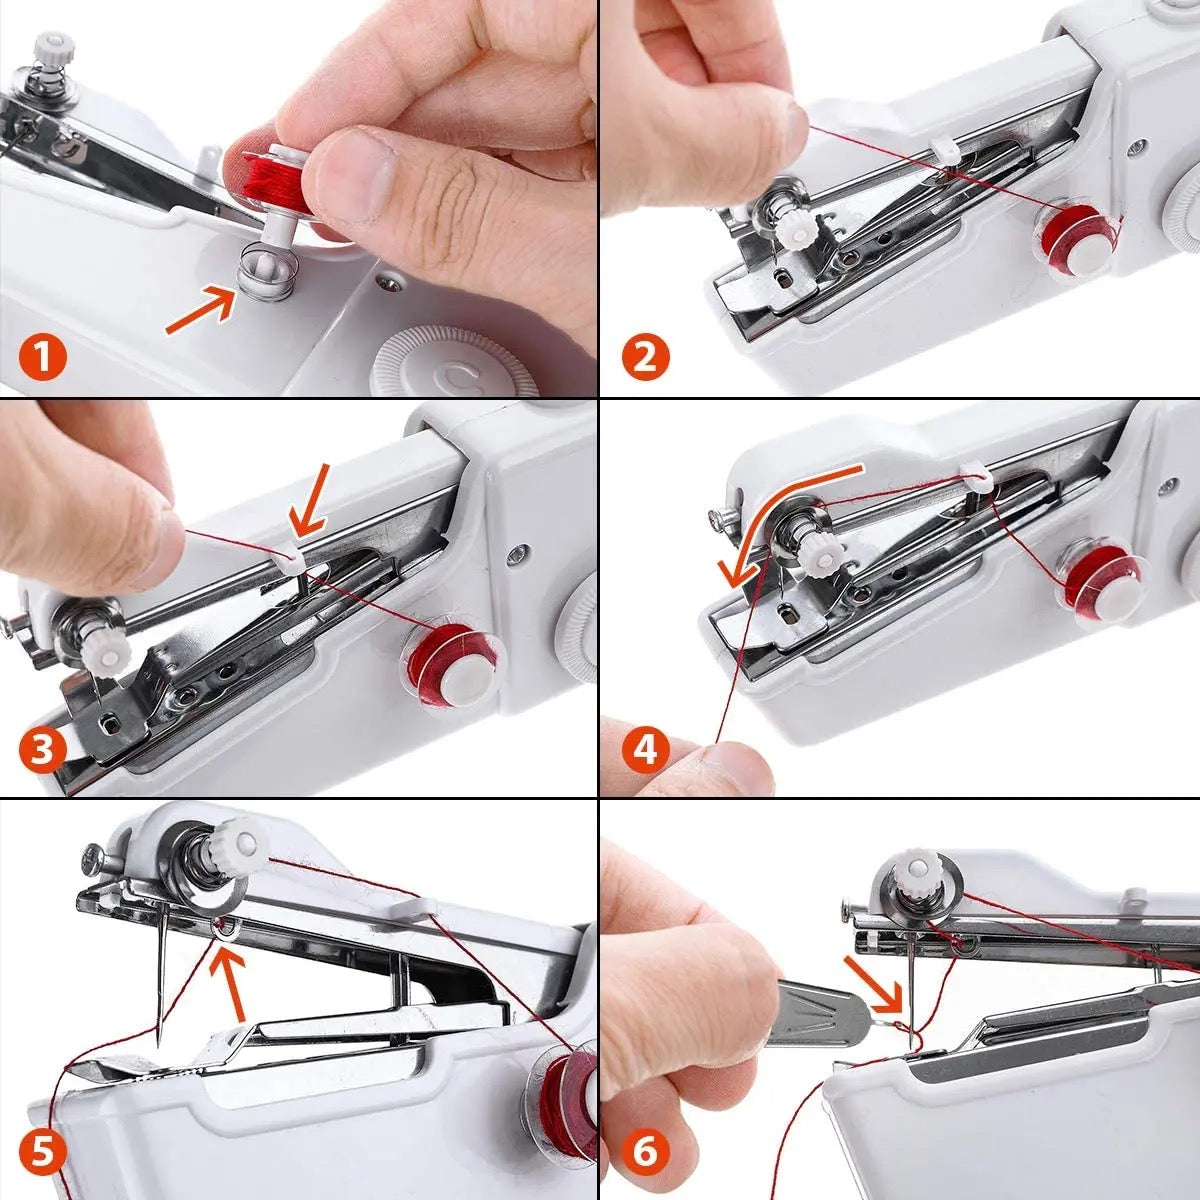 Visual representation demonstrating how to use an Electric Handheld Sewing Machine